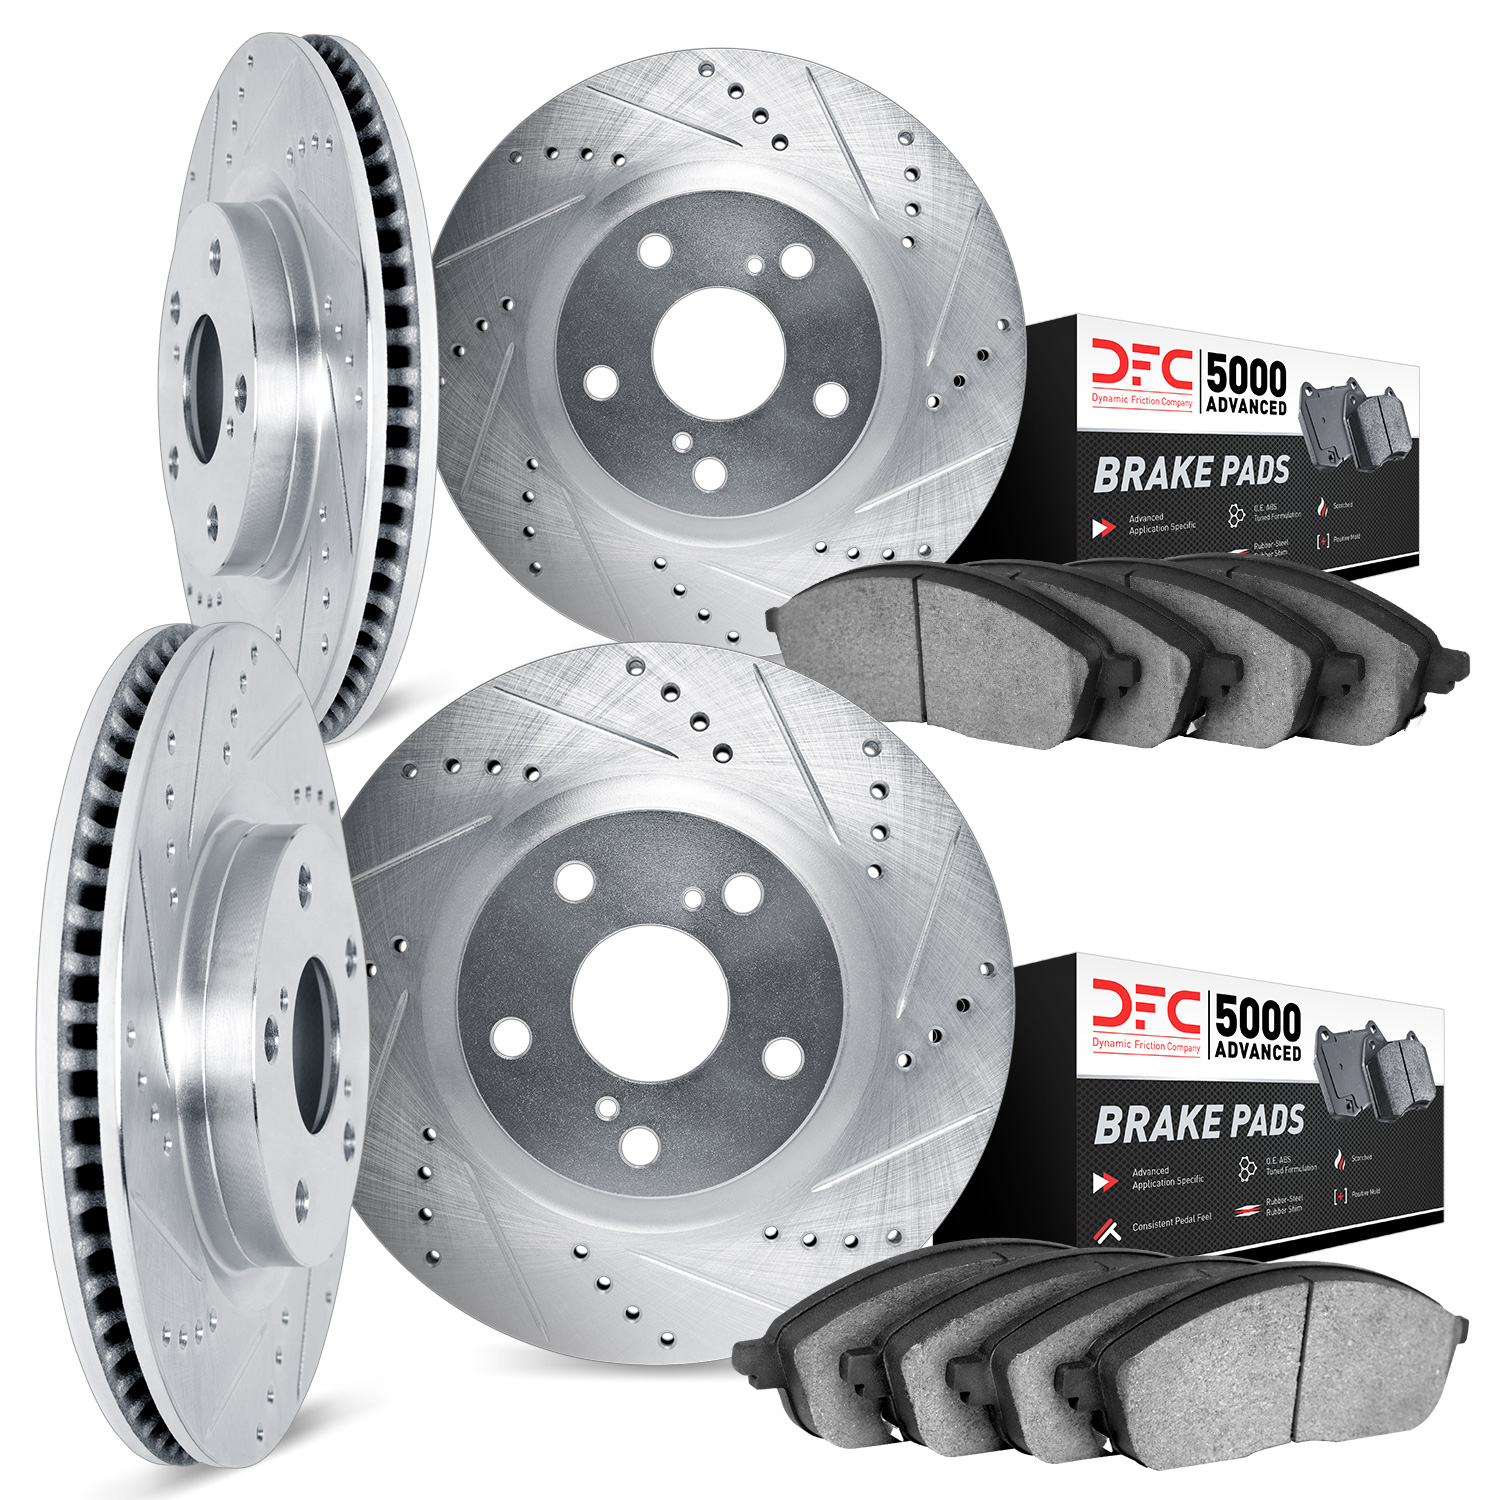 7504-67109 Drilled/Slotted Brake Rotors w/5000 Advanced Brake Pads Kit [Silver], 2011-2013 Infiniti/Nissan, Position: Front and